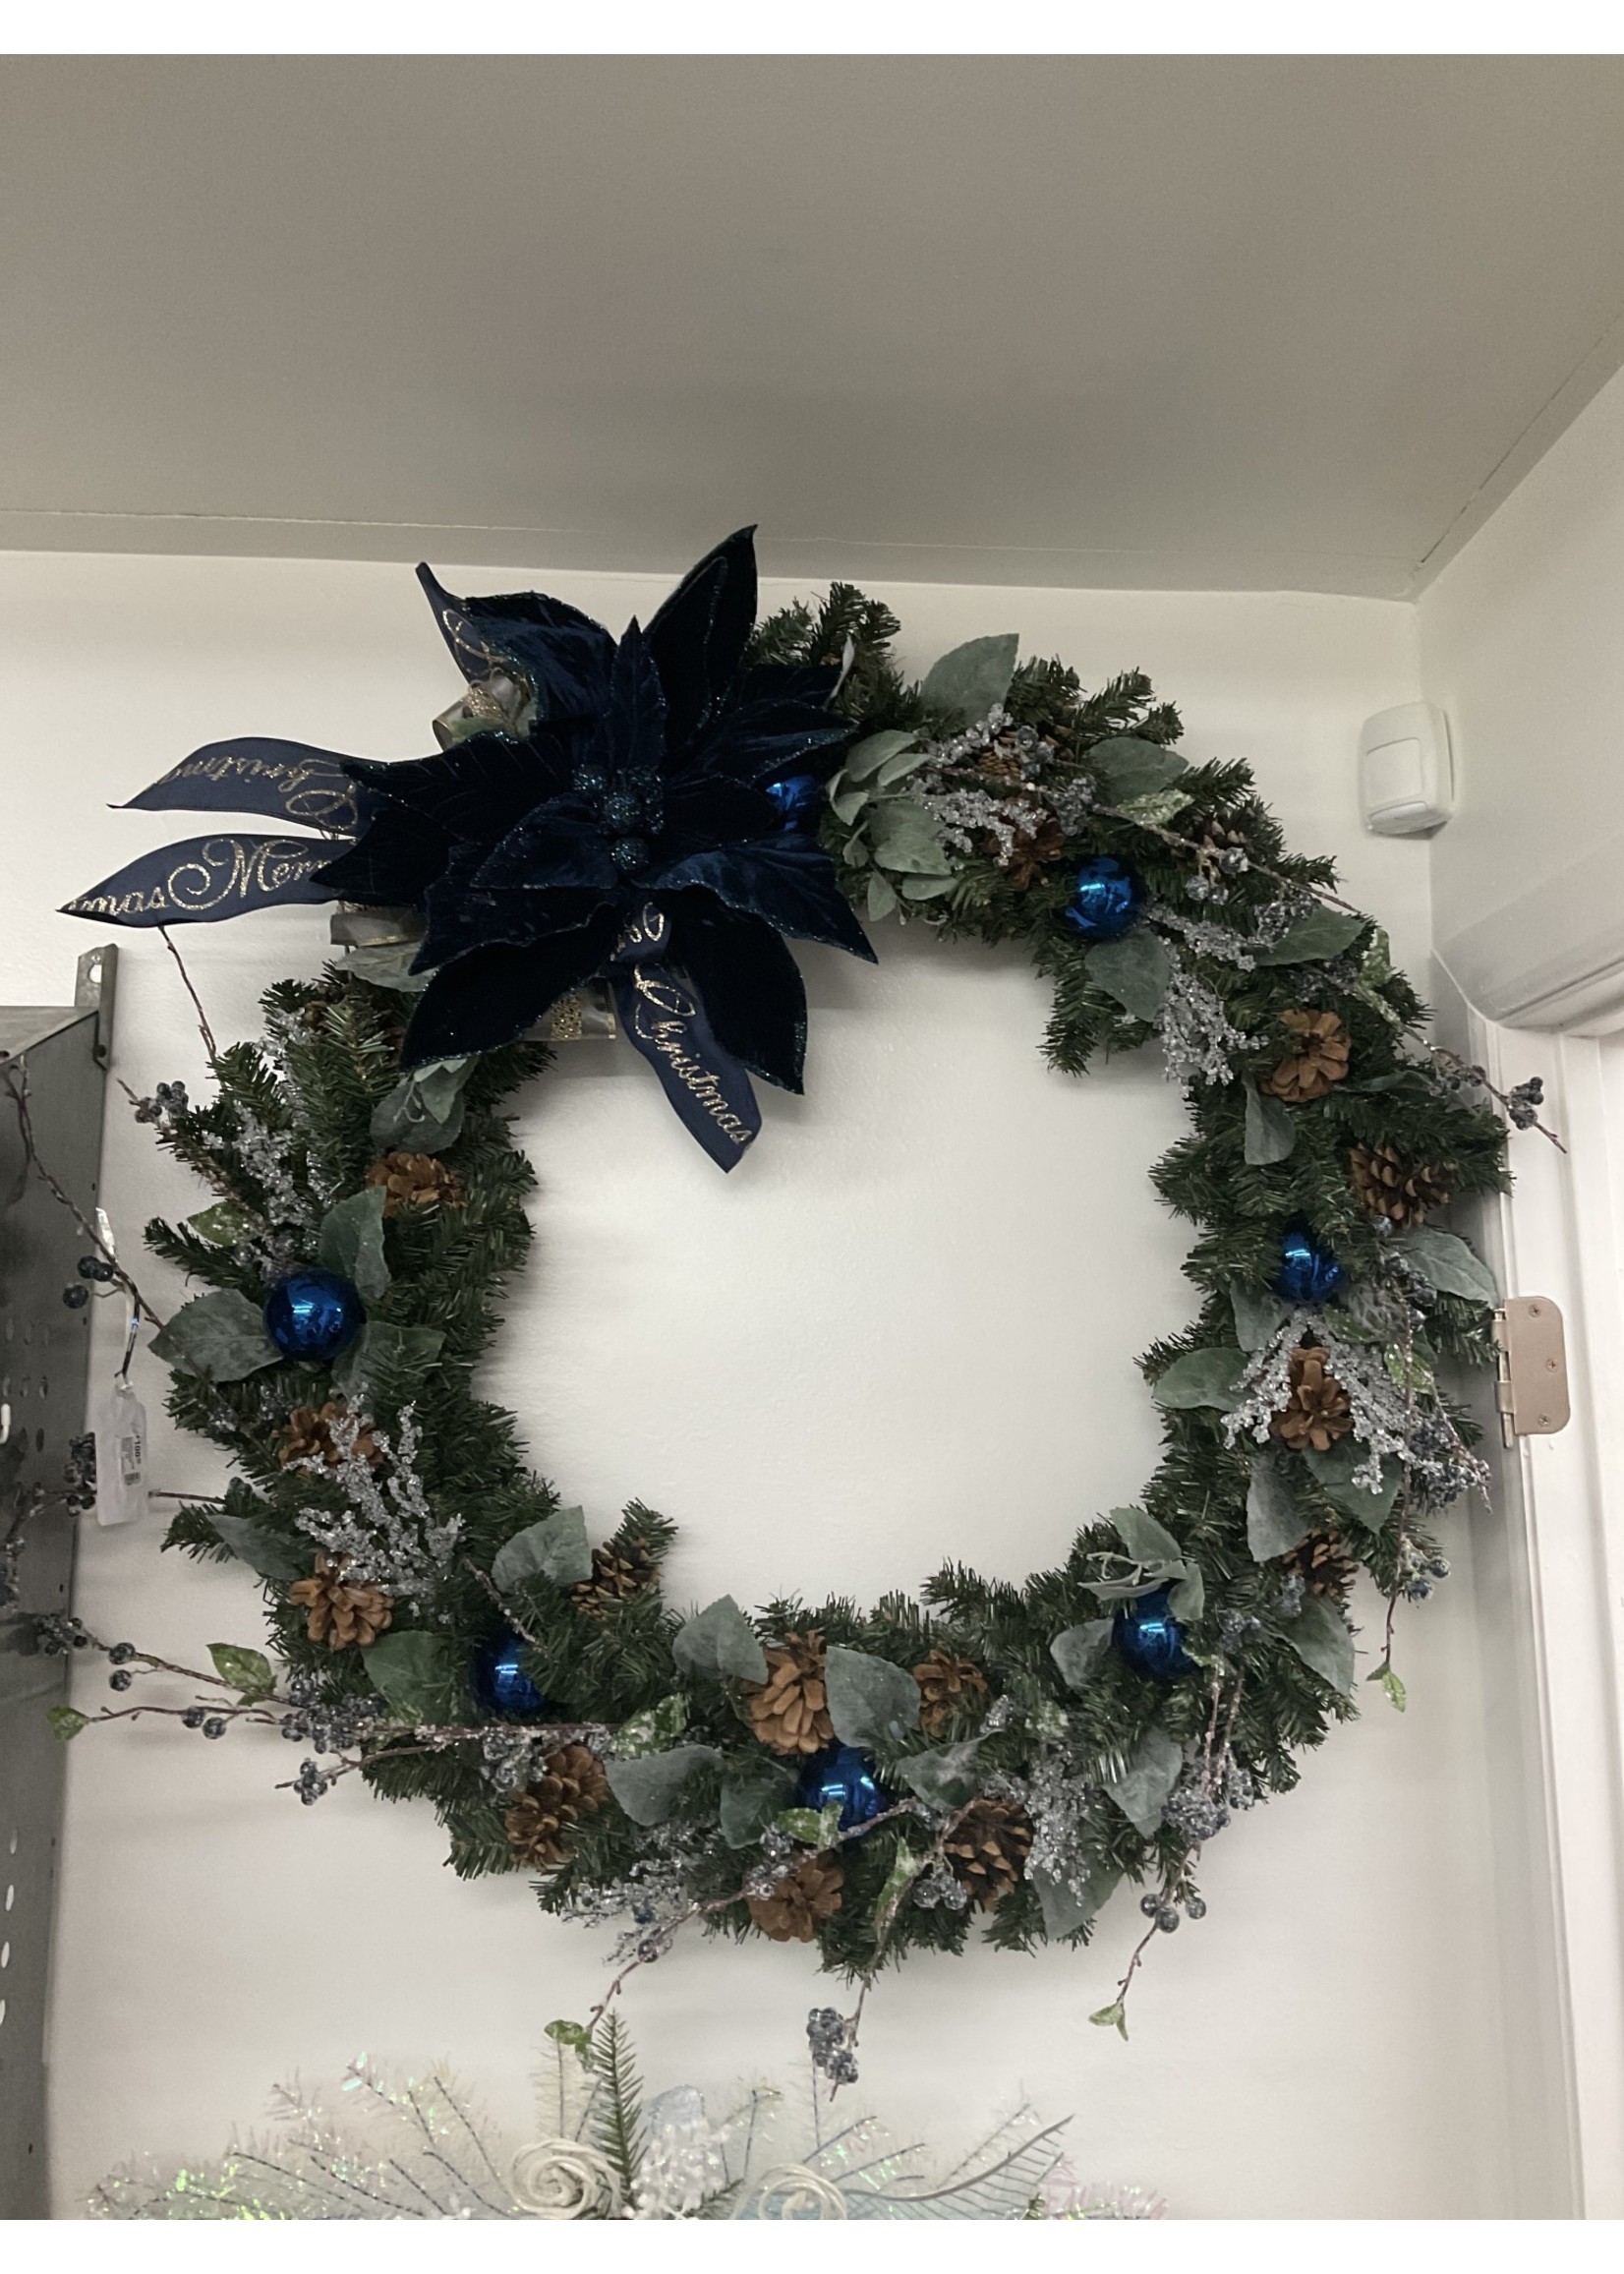 My New Favorite Thing Wreath Evergreen with Blue Poinsettia, Blue Ornaments and Blue Merry Christmas Ribbon 34 inches